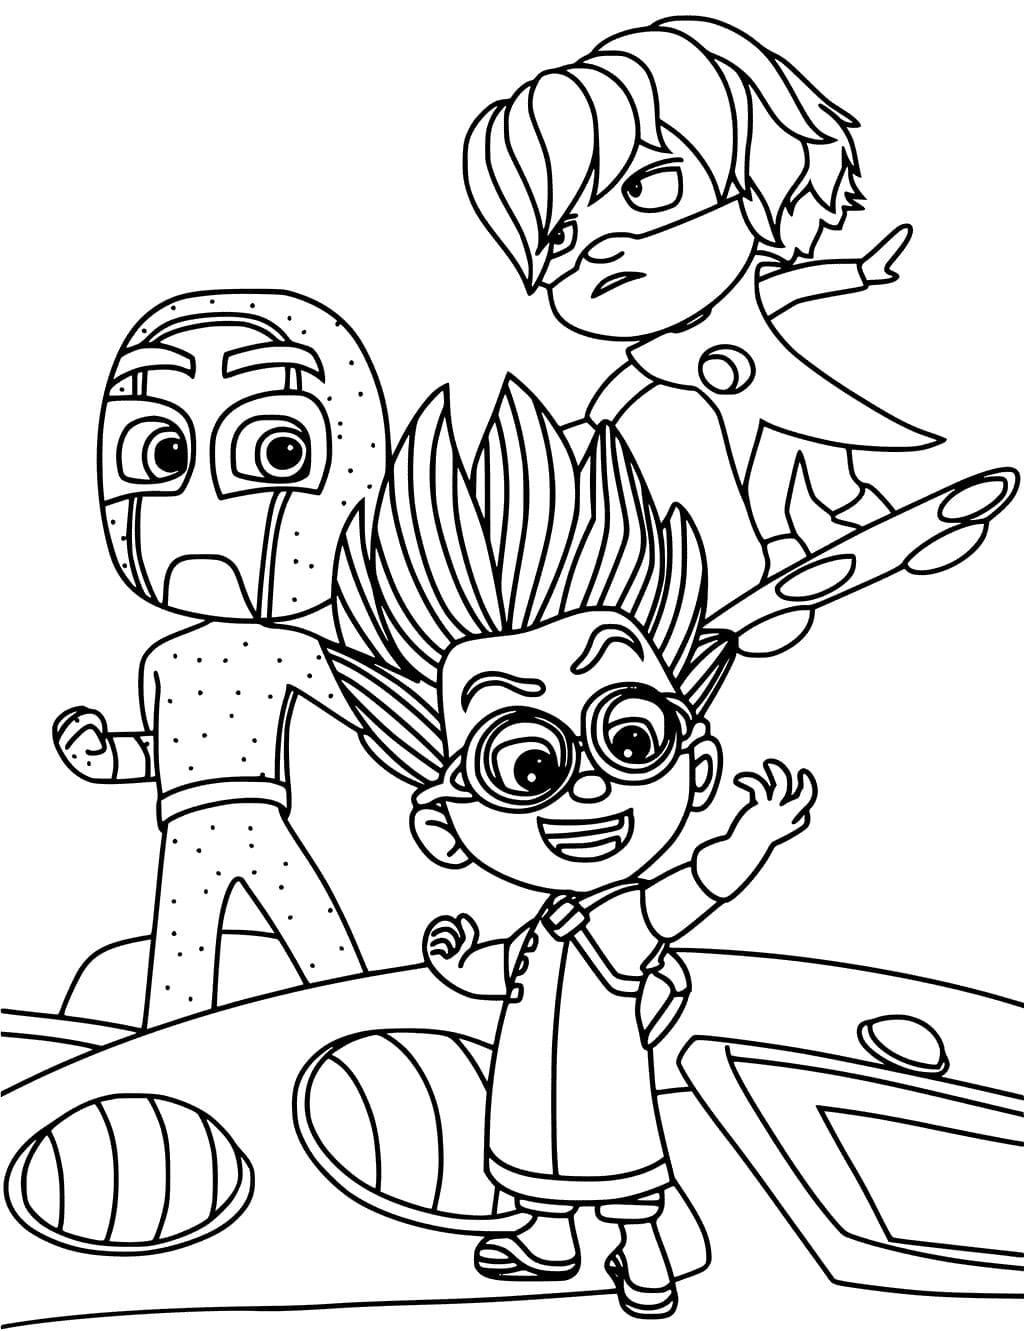 PJ Masks coloring pages. Print for free   WONDER DAY — Coloring ...